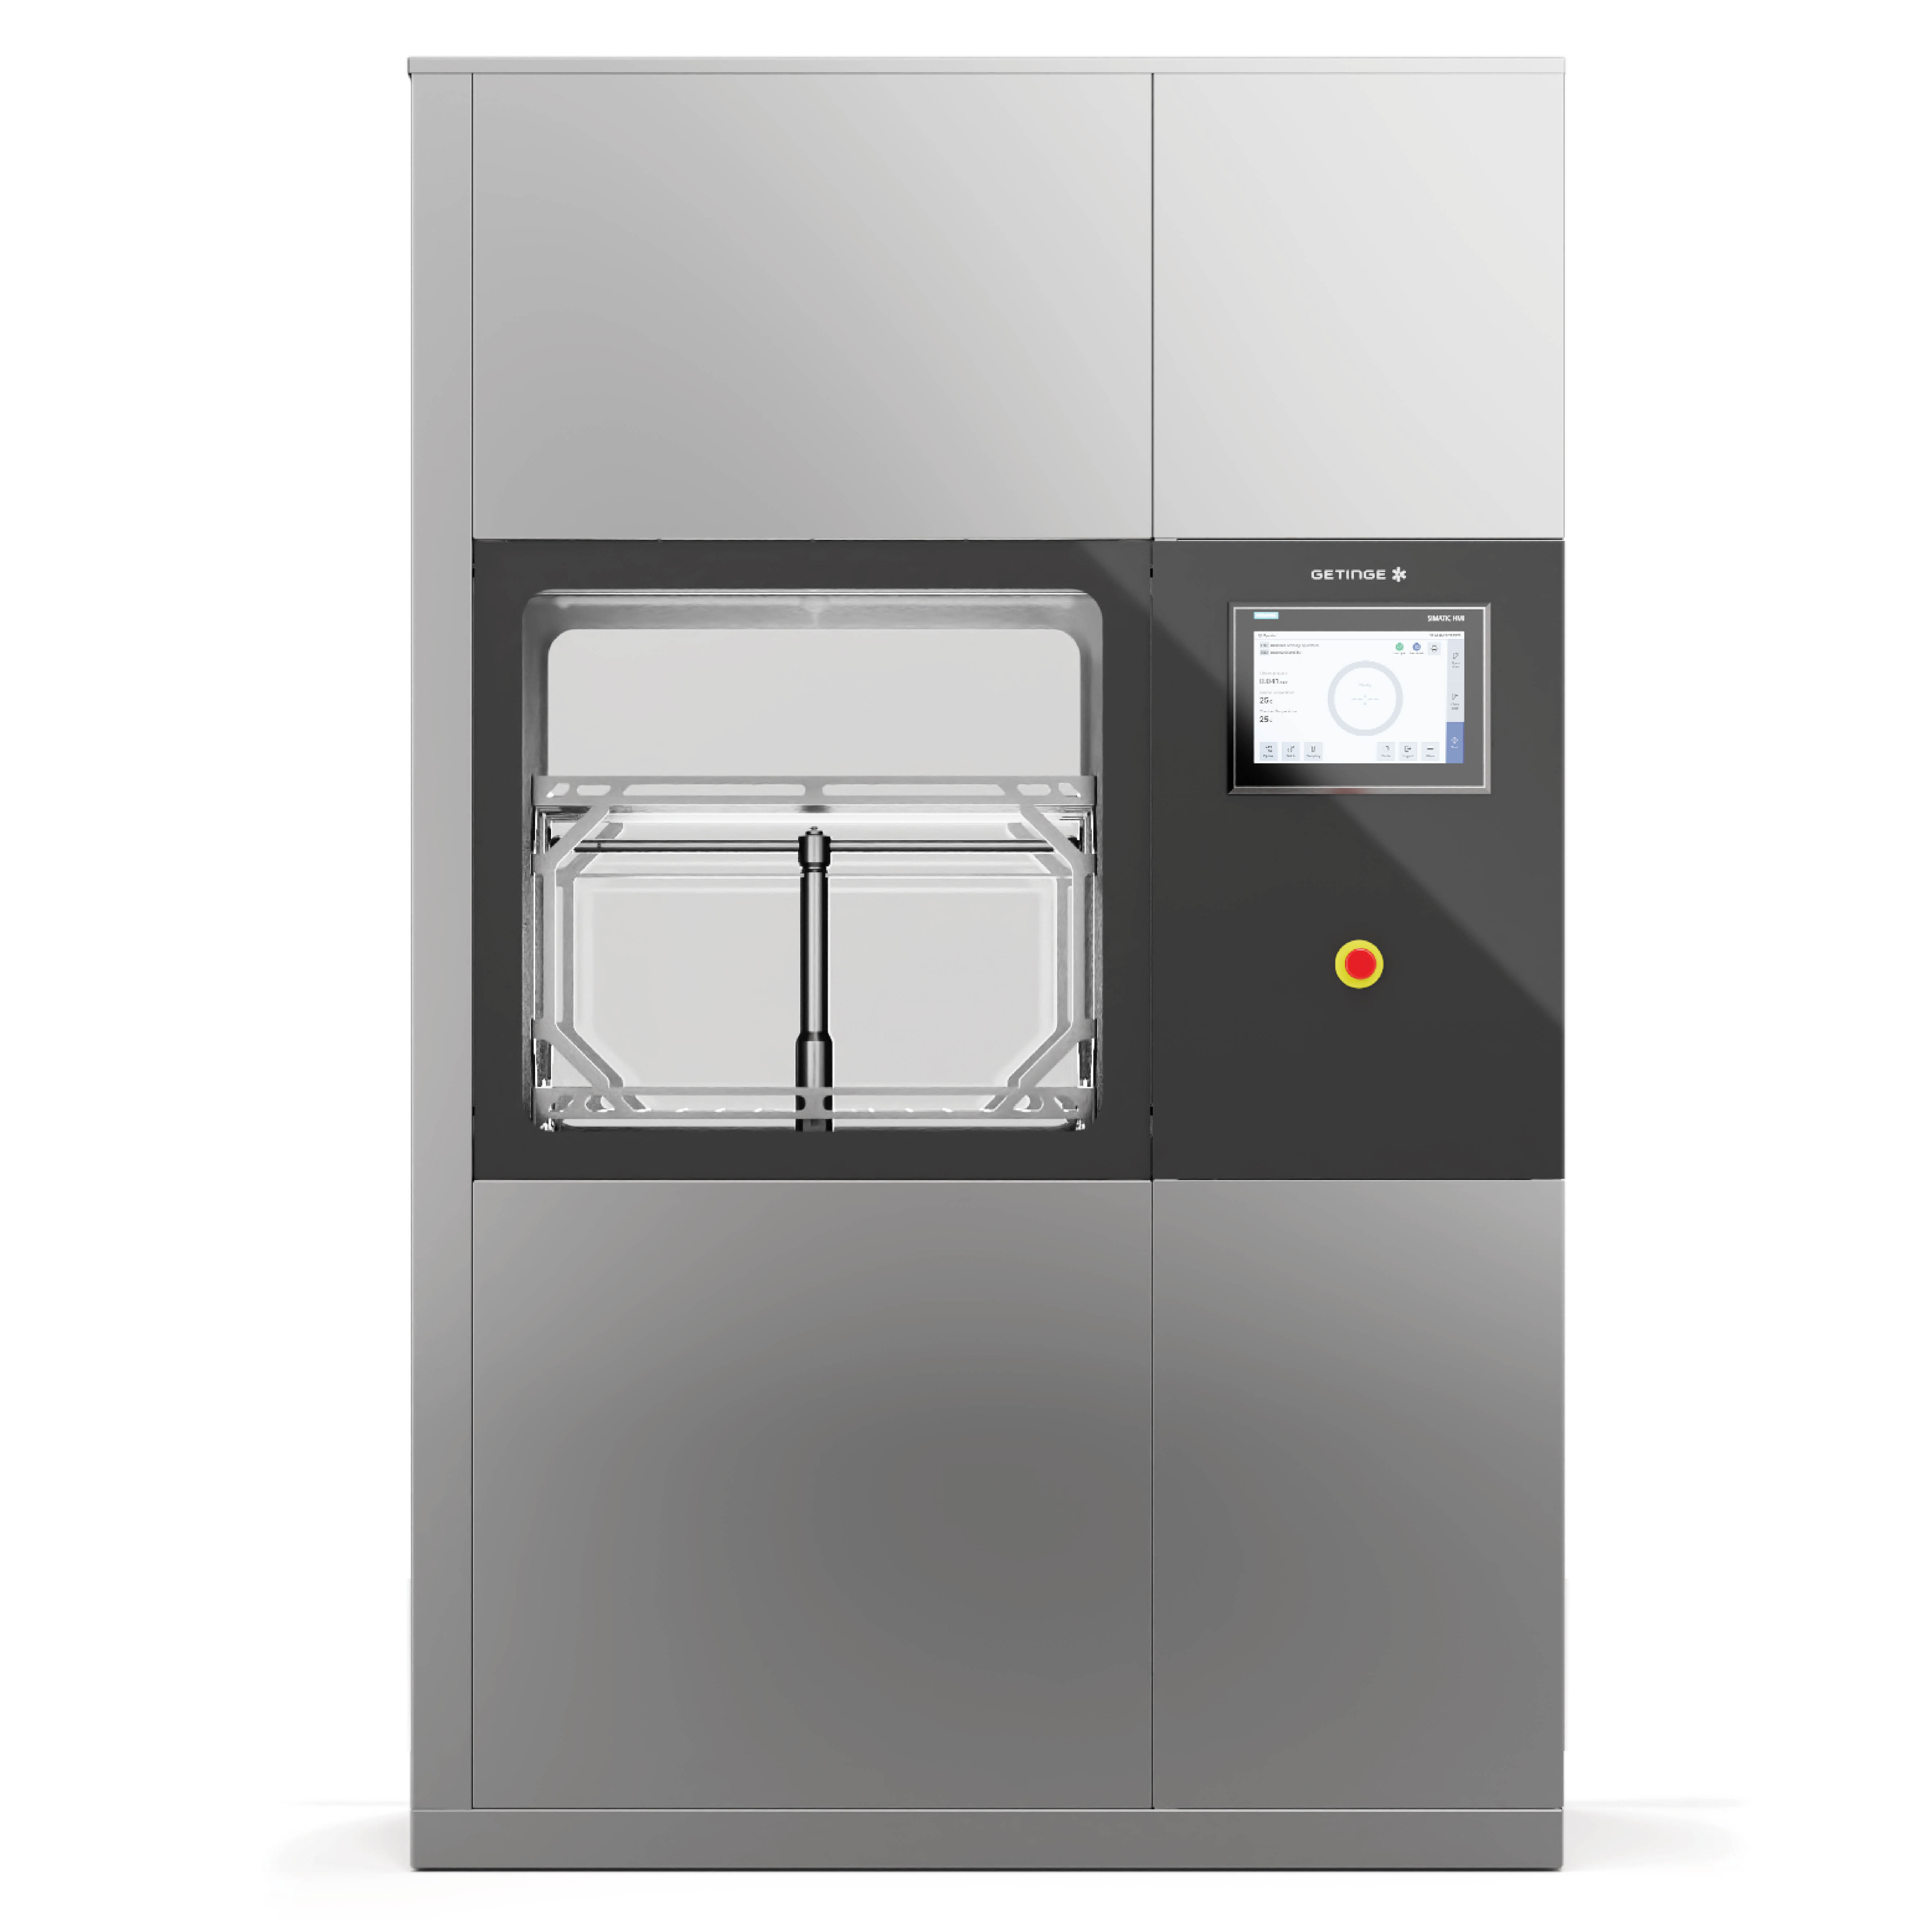 cGMP washer GEW 888 neo-front view